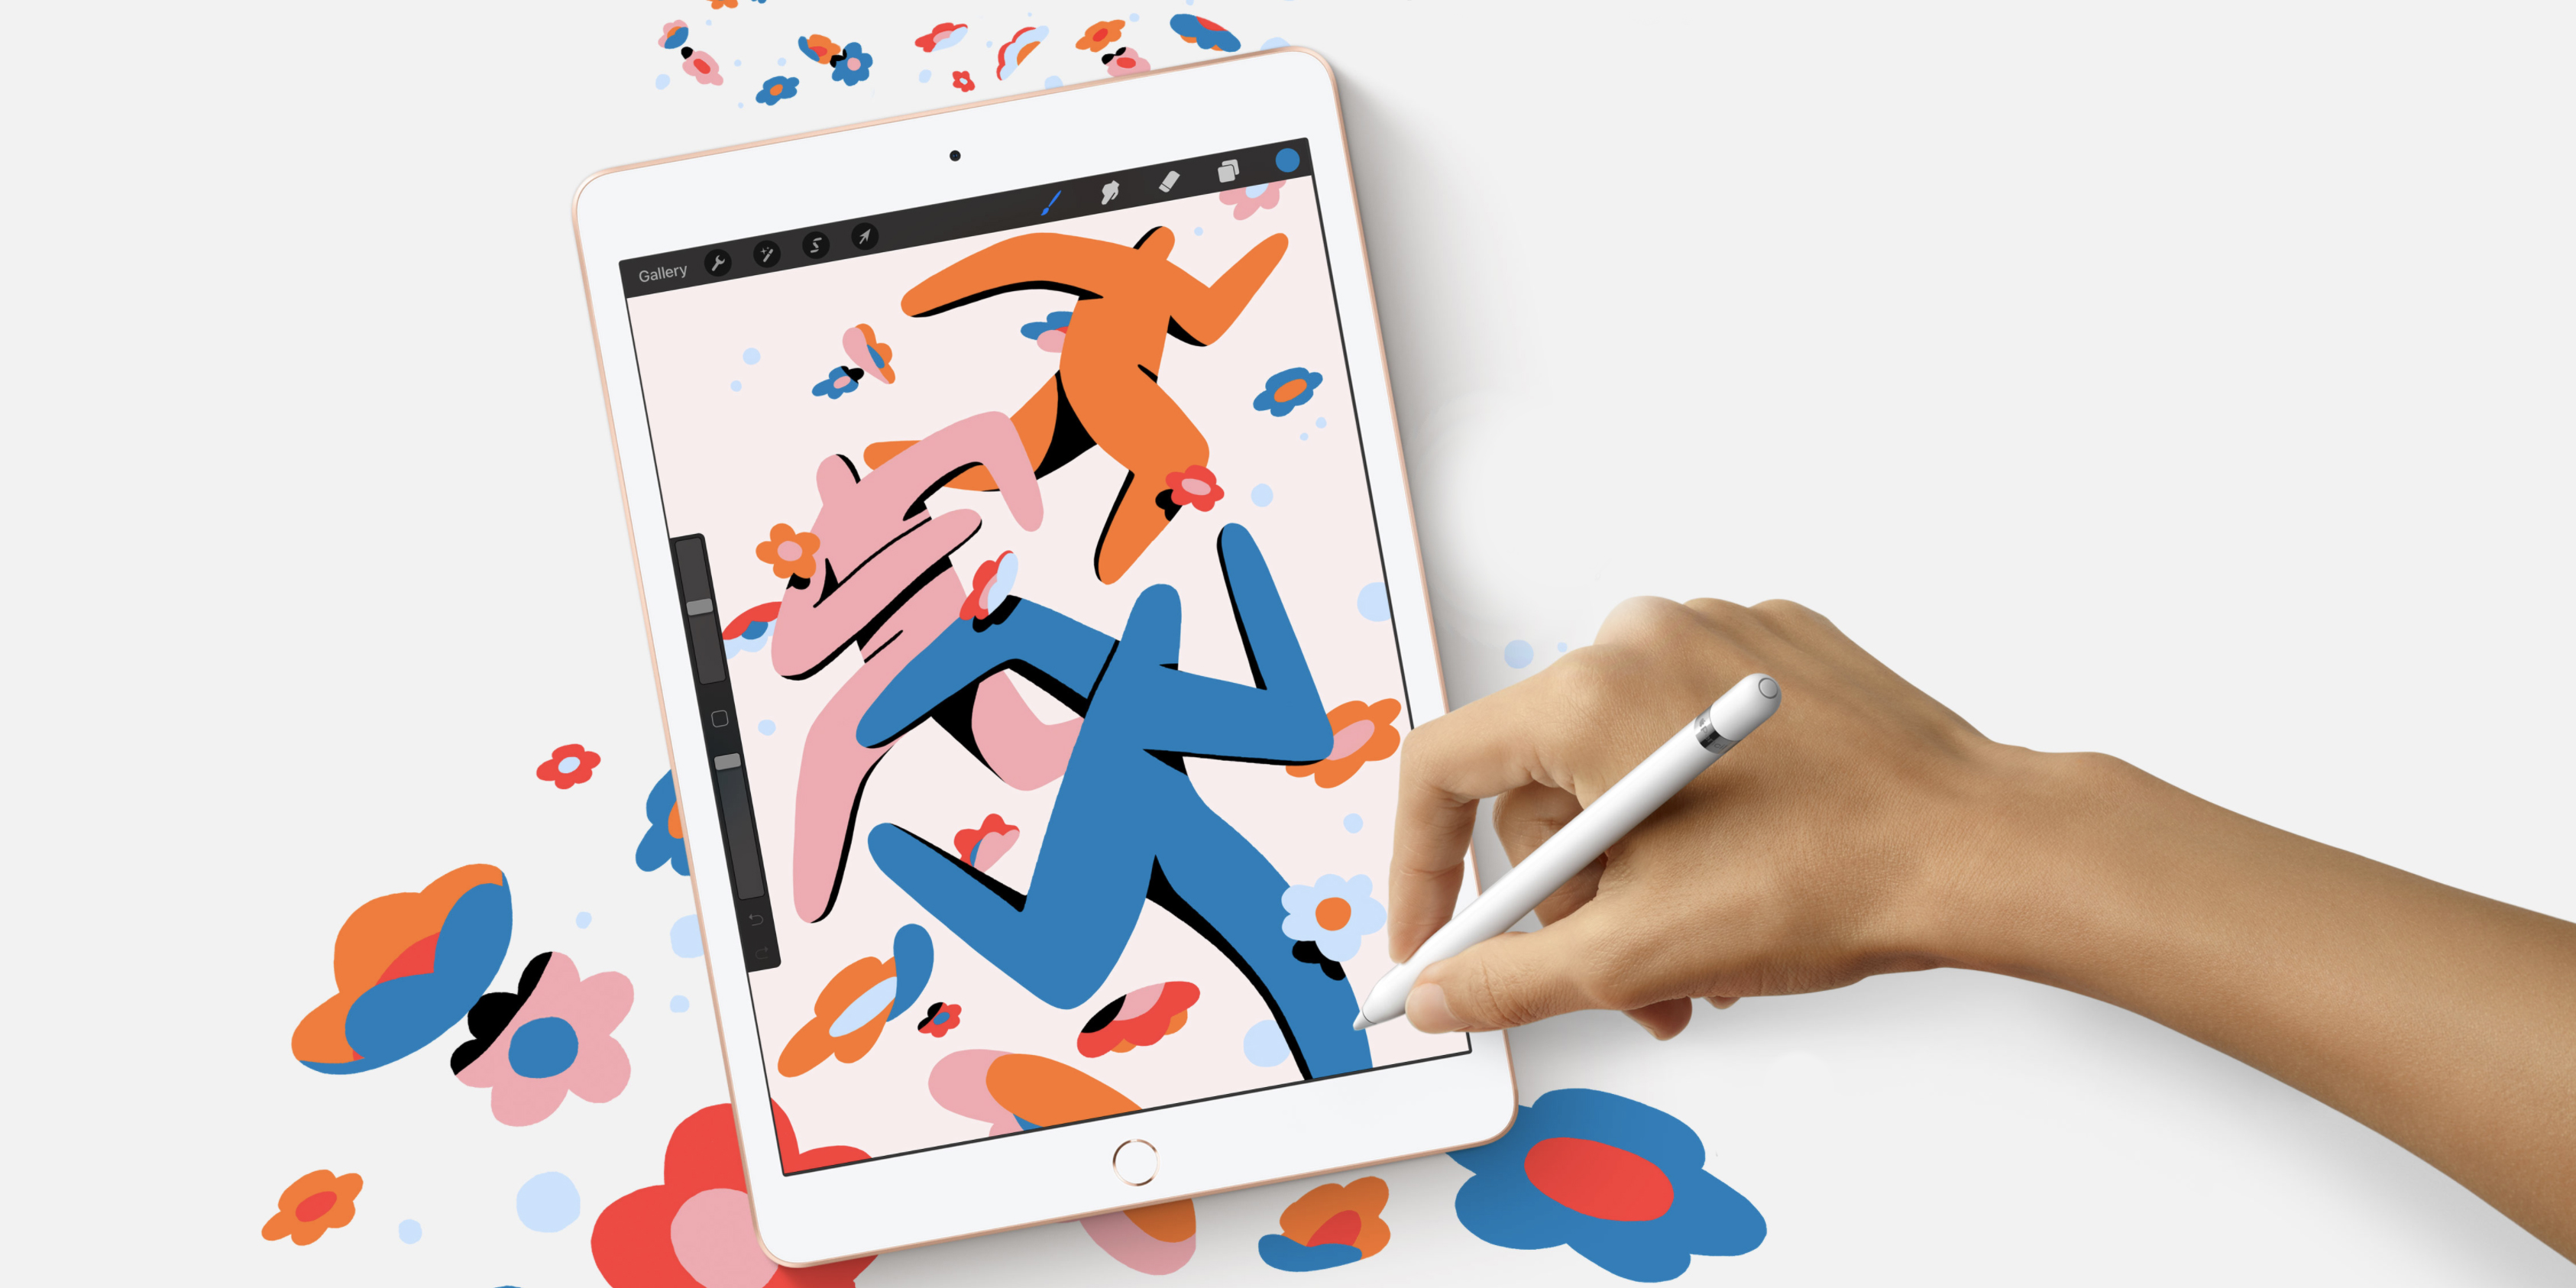 photo of Apple’s new 10.2-inch iPad sees first discounts, latest 13-inch MacBook Pro $199 off in today’s best deals image